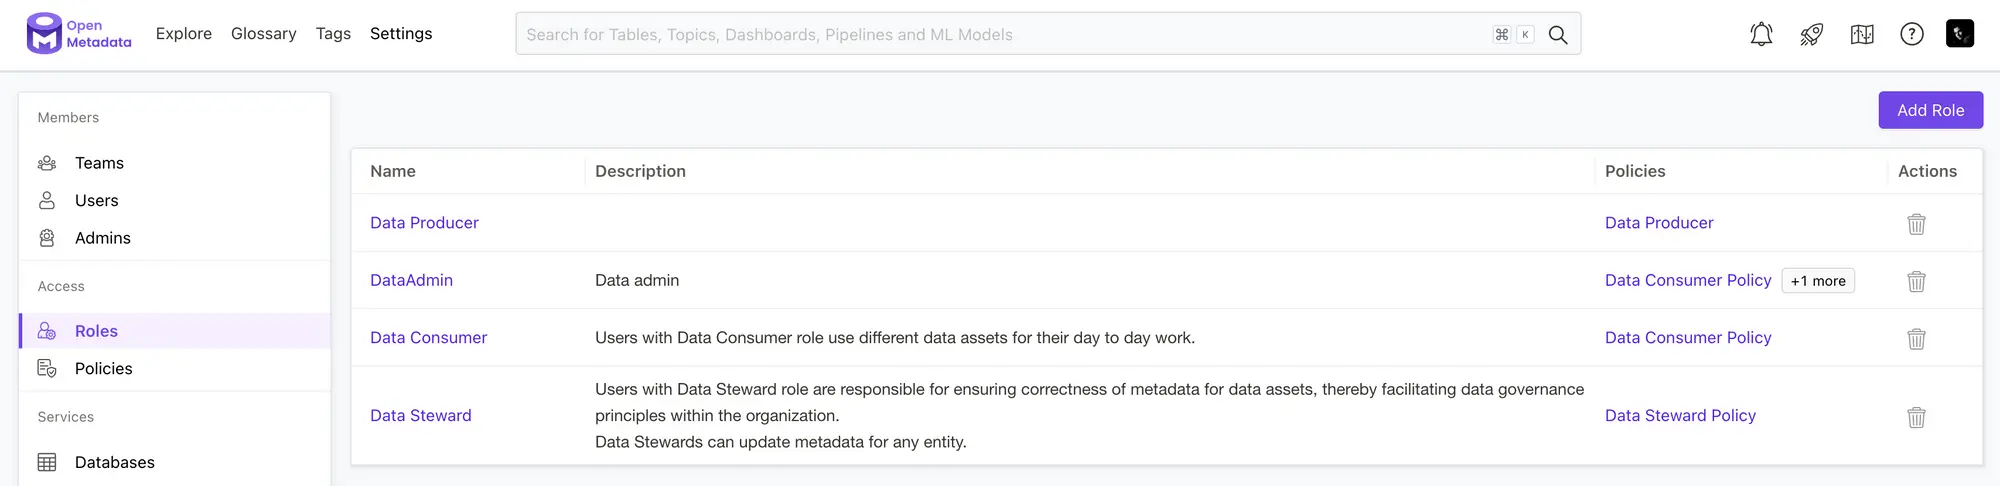 OpenMetadata supports role-based access controls(RBAC)